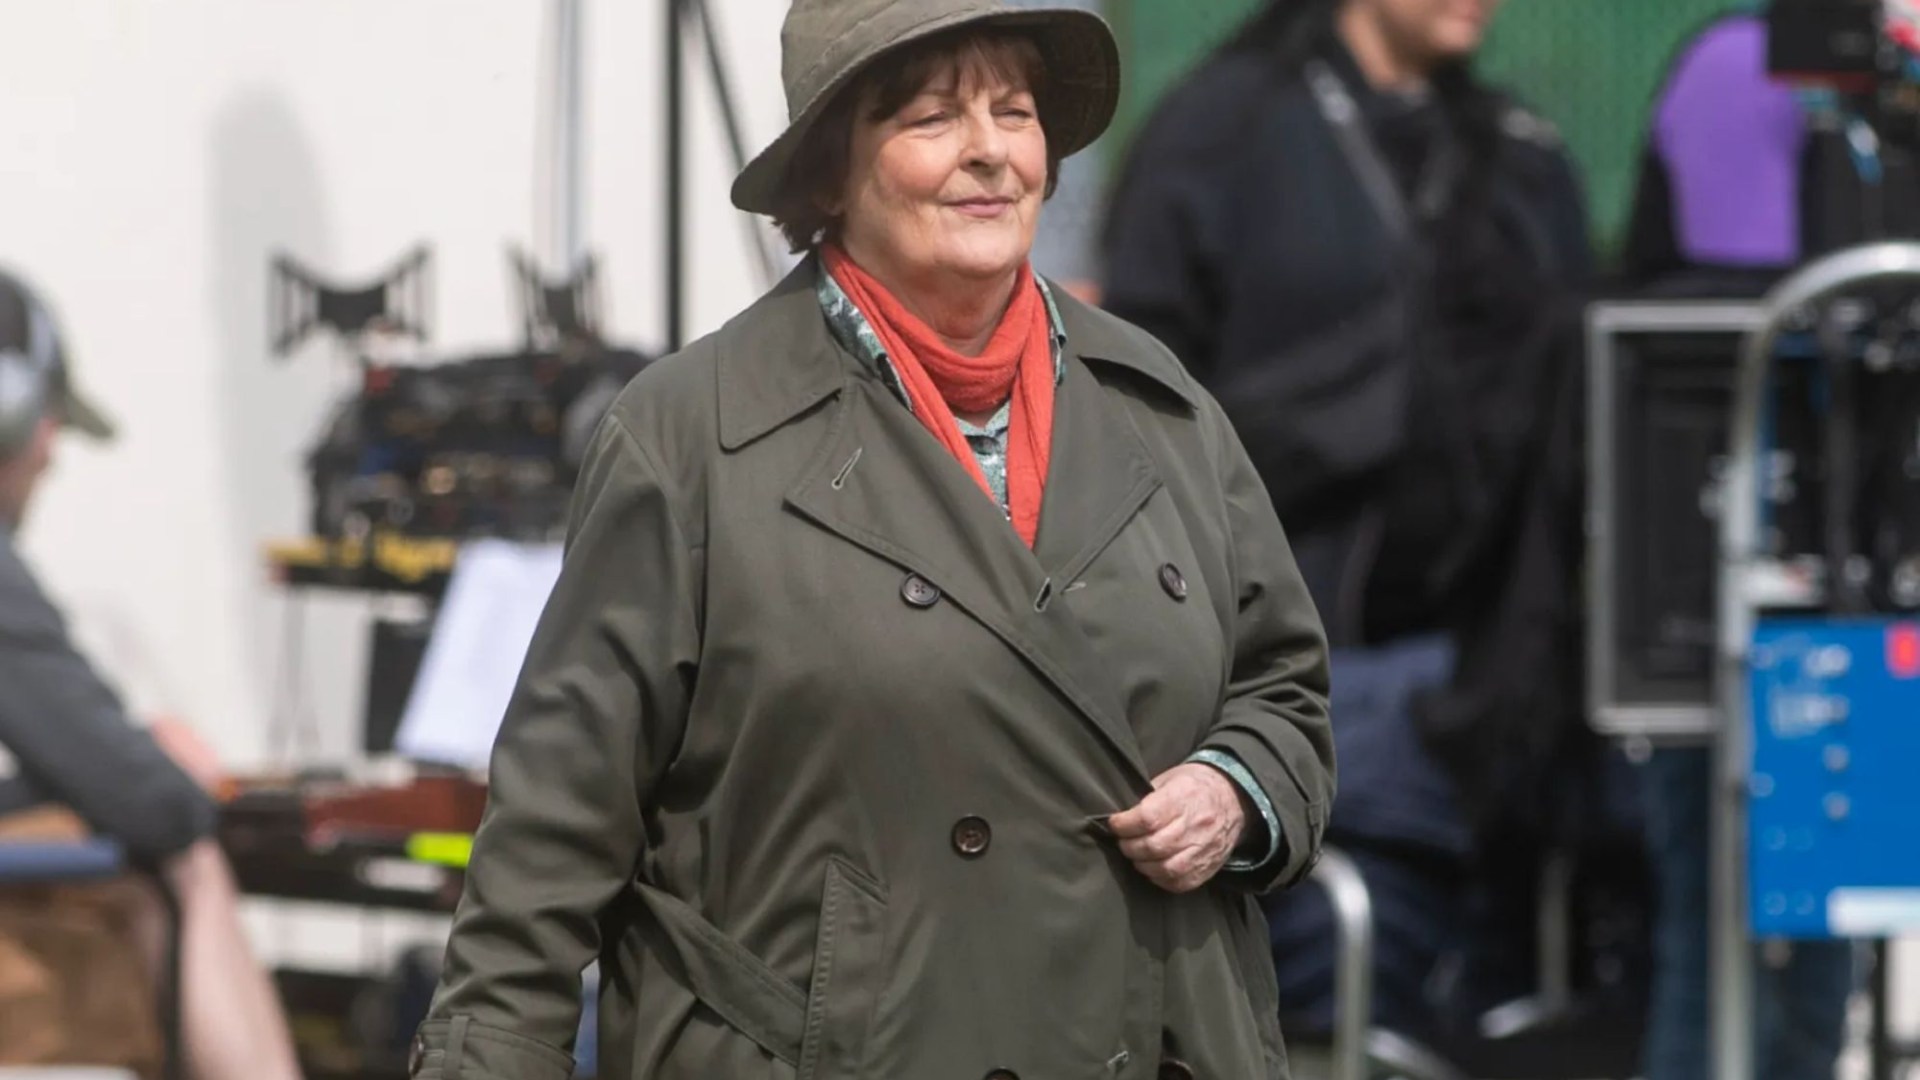 Vera fans stunned after spotting Brenda Blethyn filming in their town – and ‘rumble’ where she’s going next [Video]